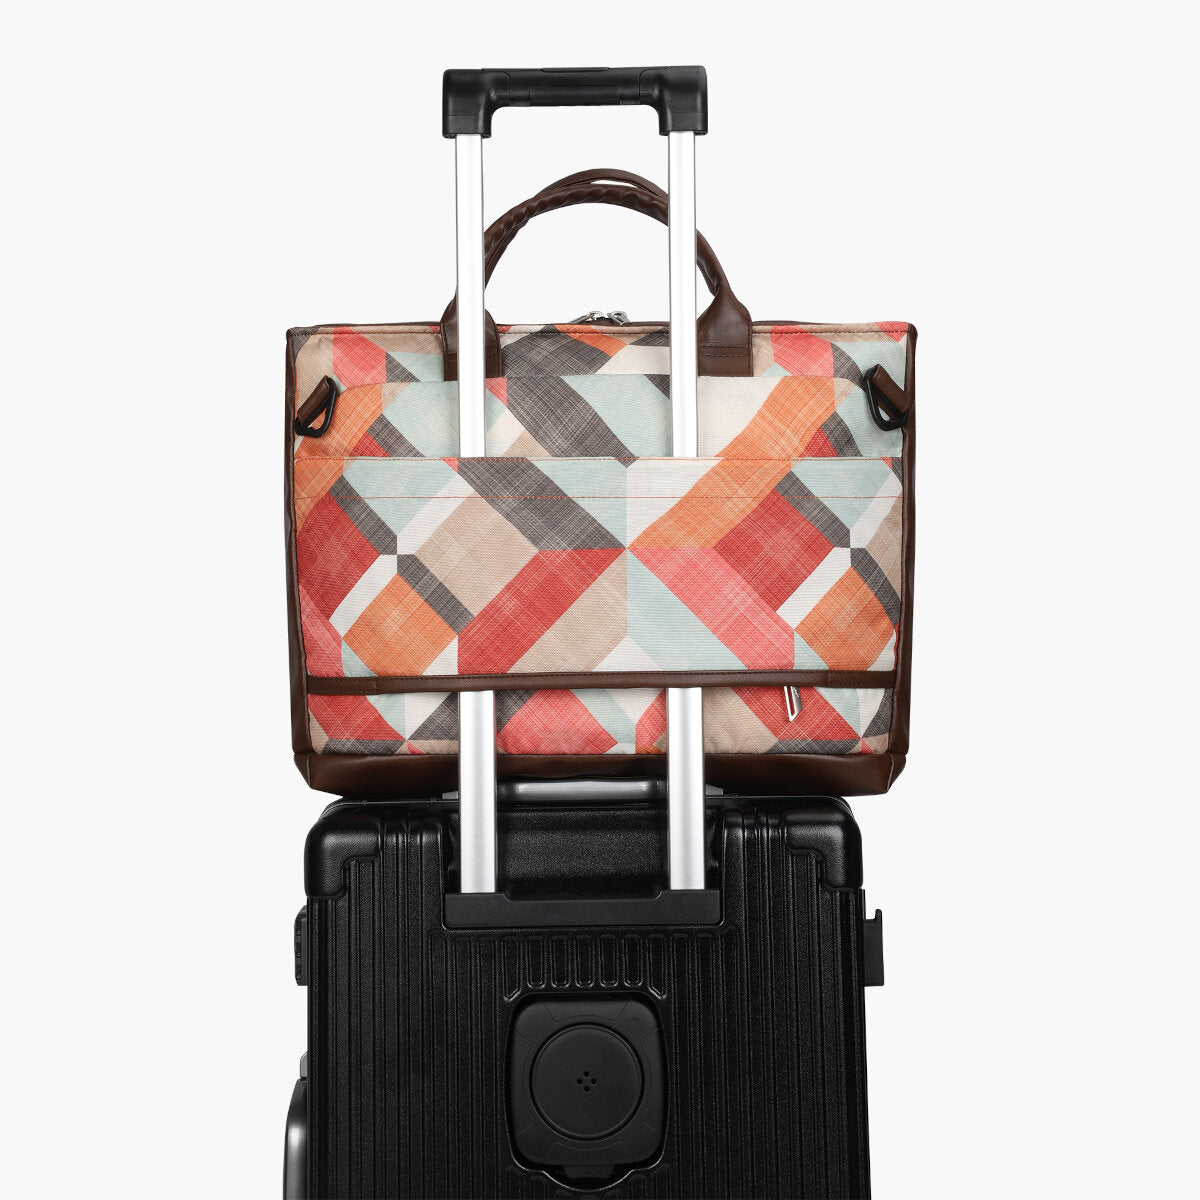 Geometric Print | Protecta Evenly Poised Office Laptop Bag for Women - 8